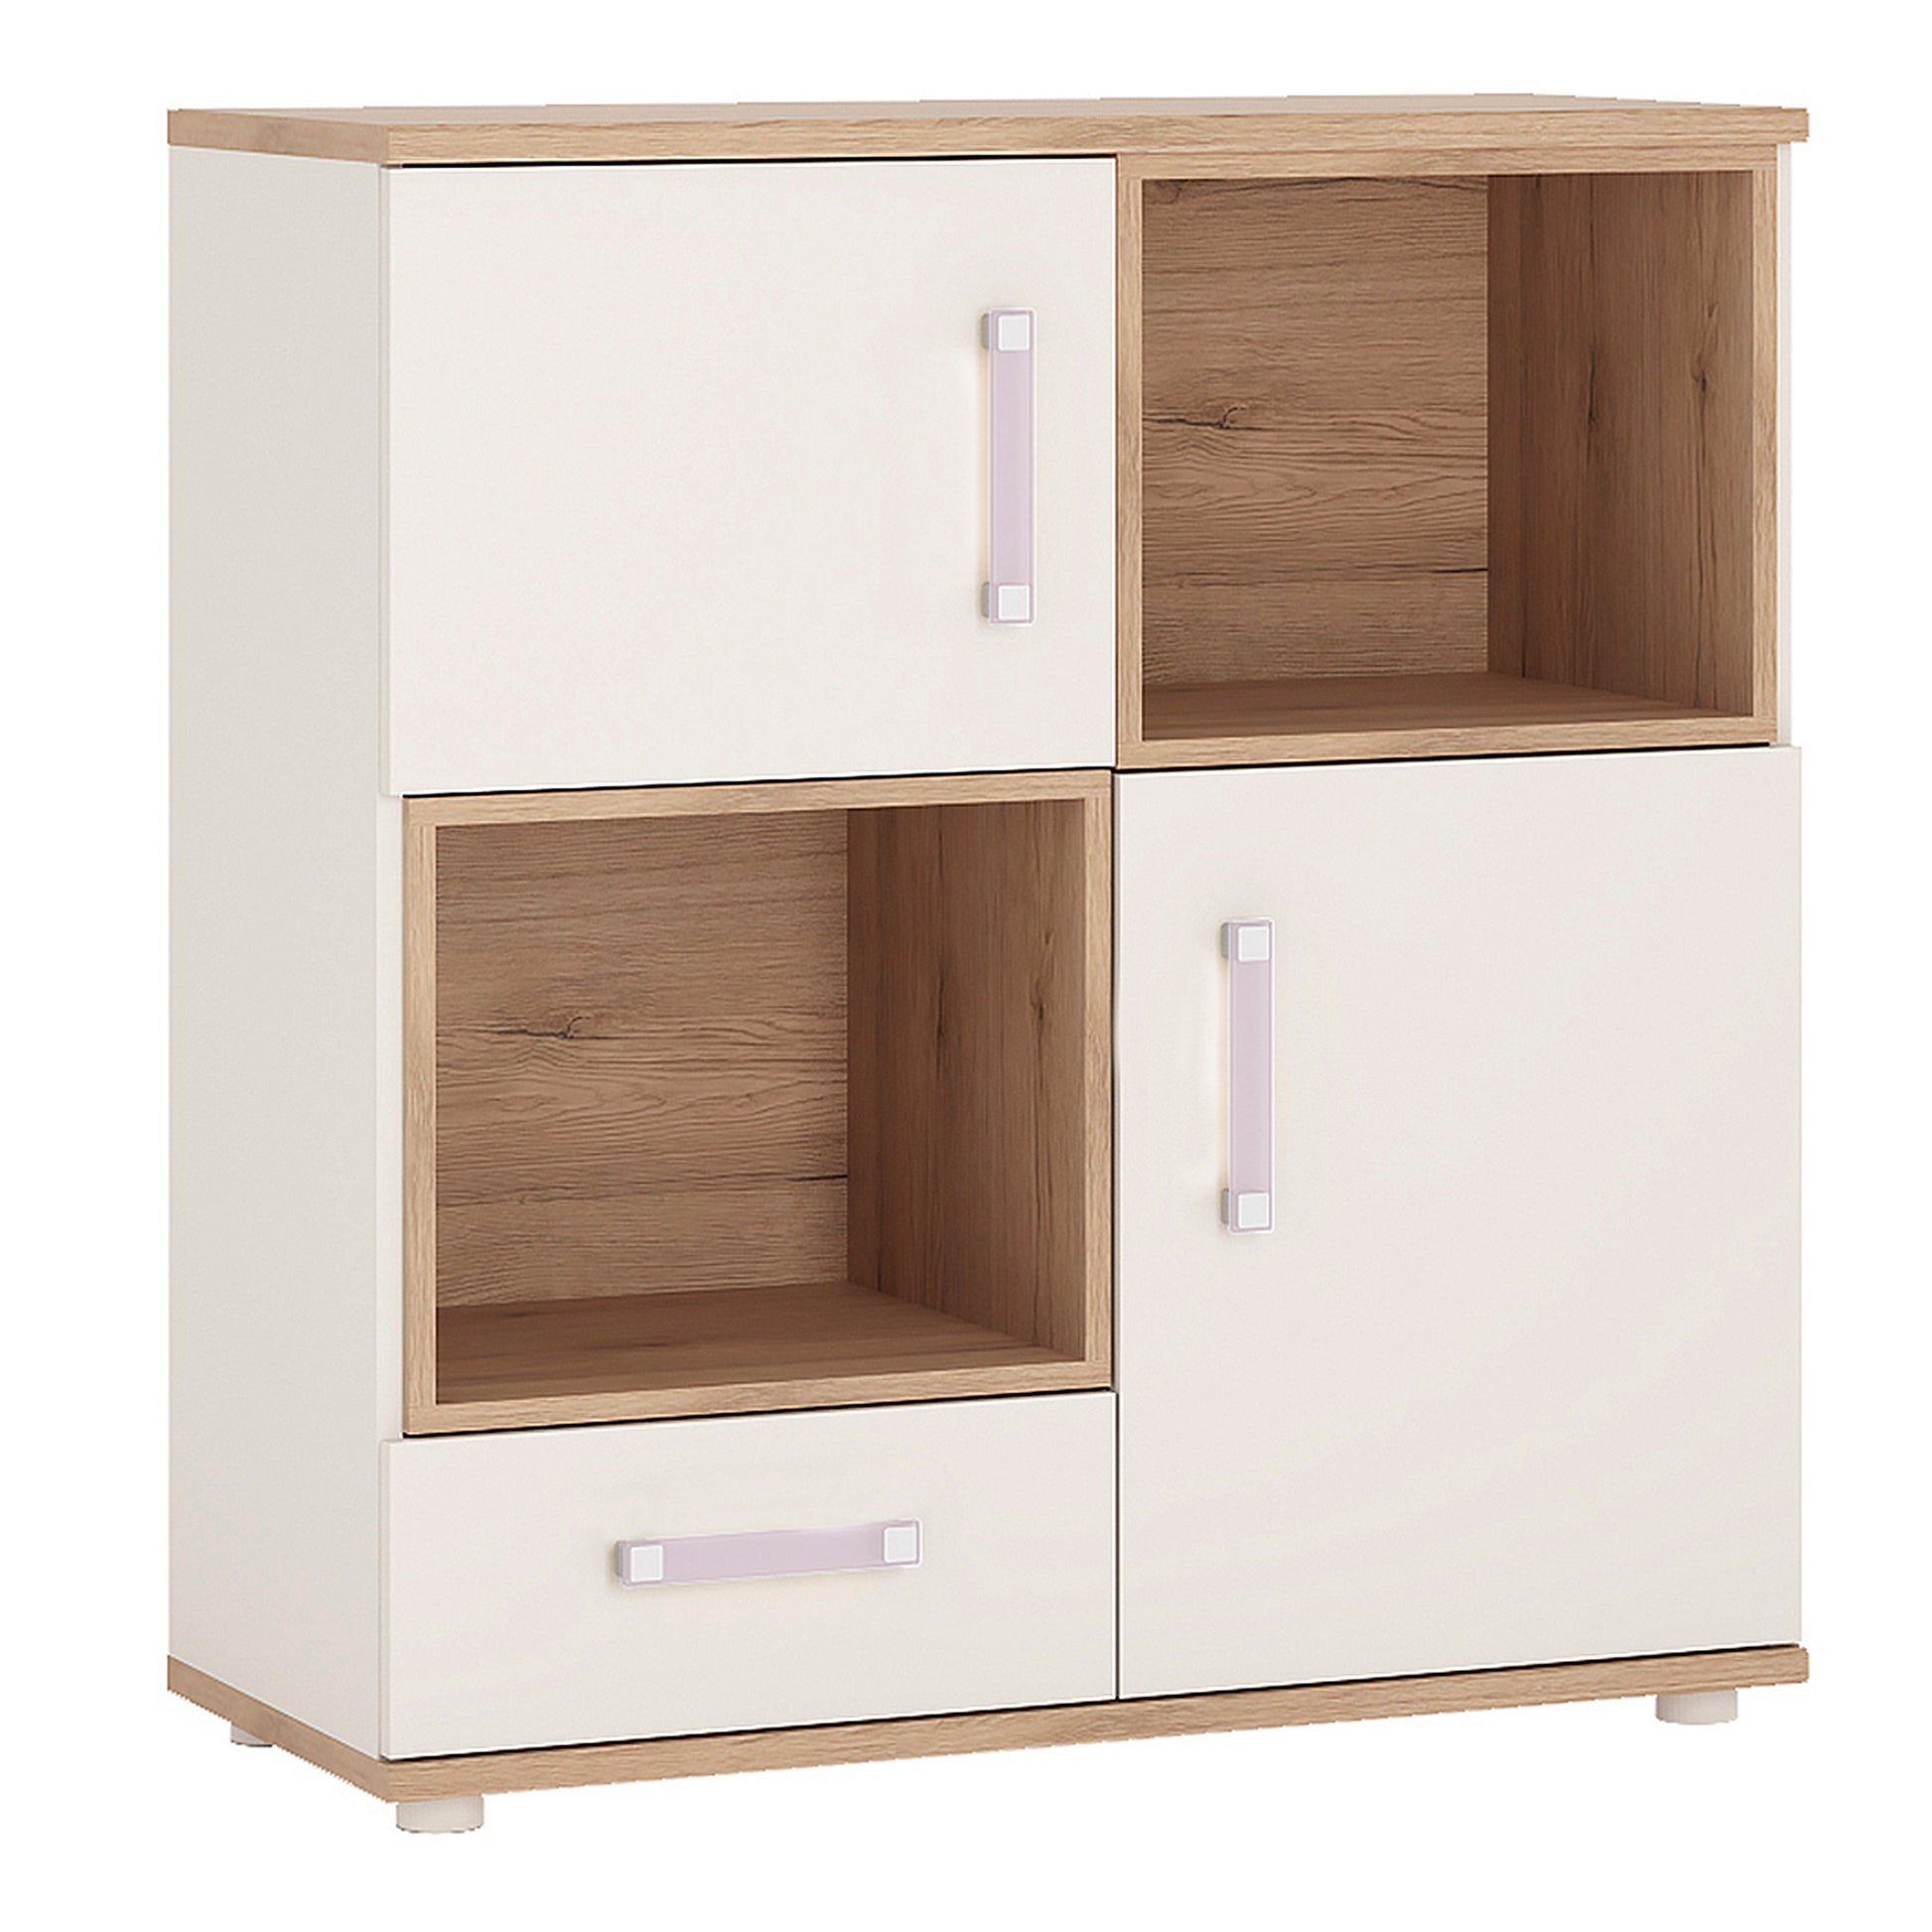 4Kids  2 Door 1 Drawer Cupboard with 2 open shelves in Light Oak and white High Gloss (lilac handles)